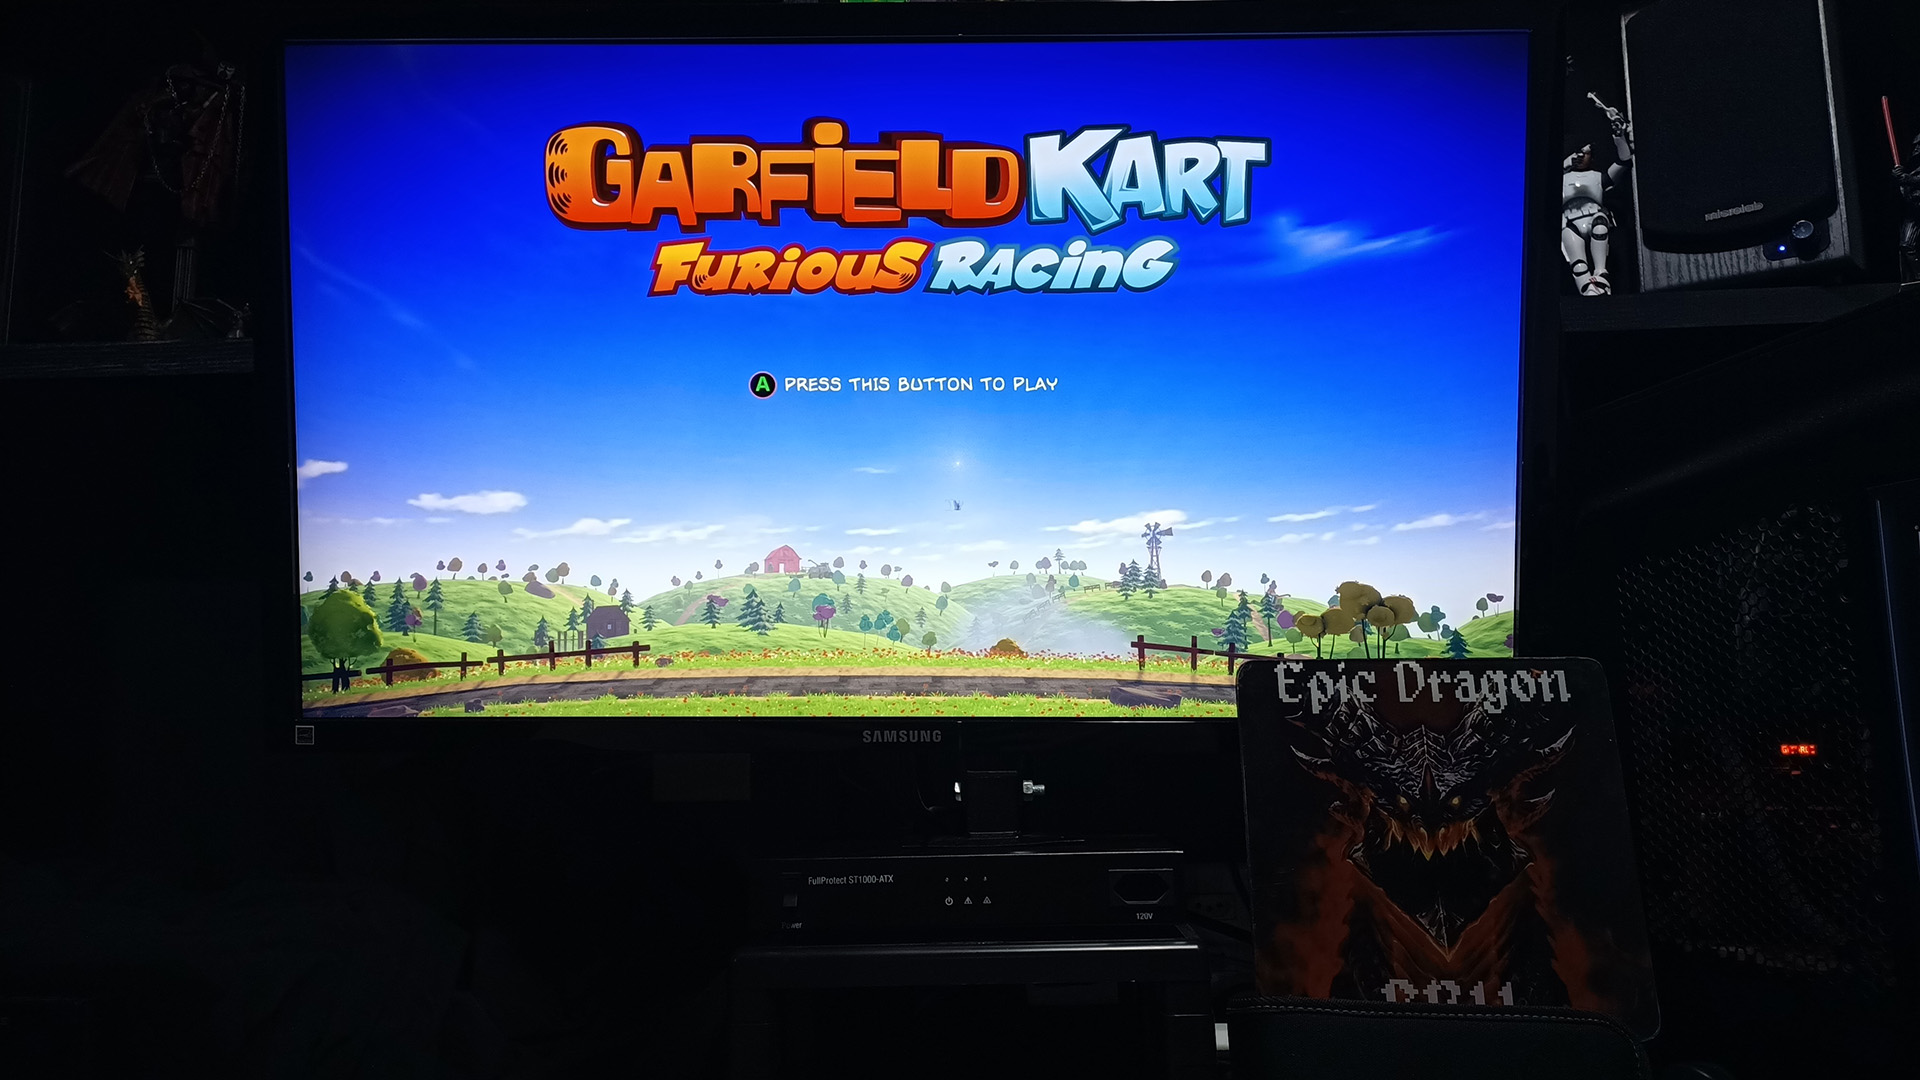 EpicDragon: Garfield Kart Furious Racing: Blazing Oasis [Time Trial: Lap Time] (PC) 0:00:53.585 points on 2022-08-05 17:25:35